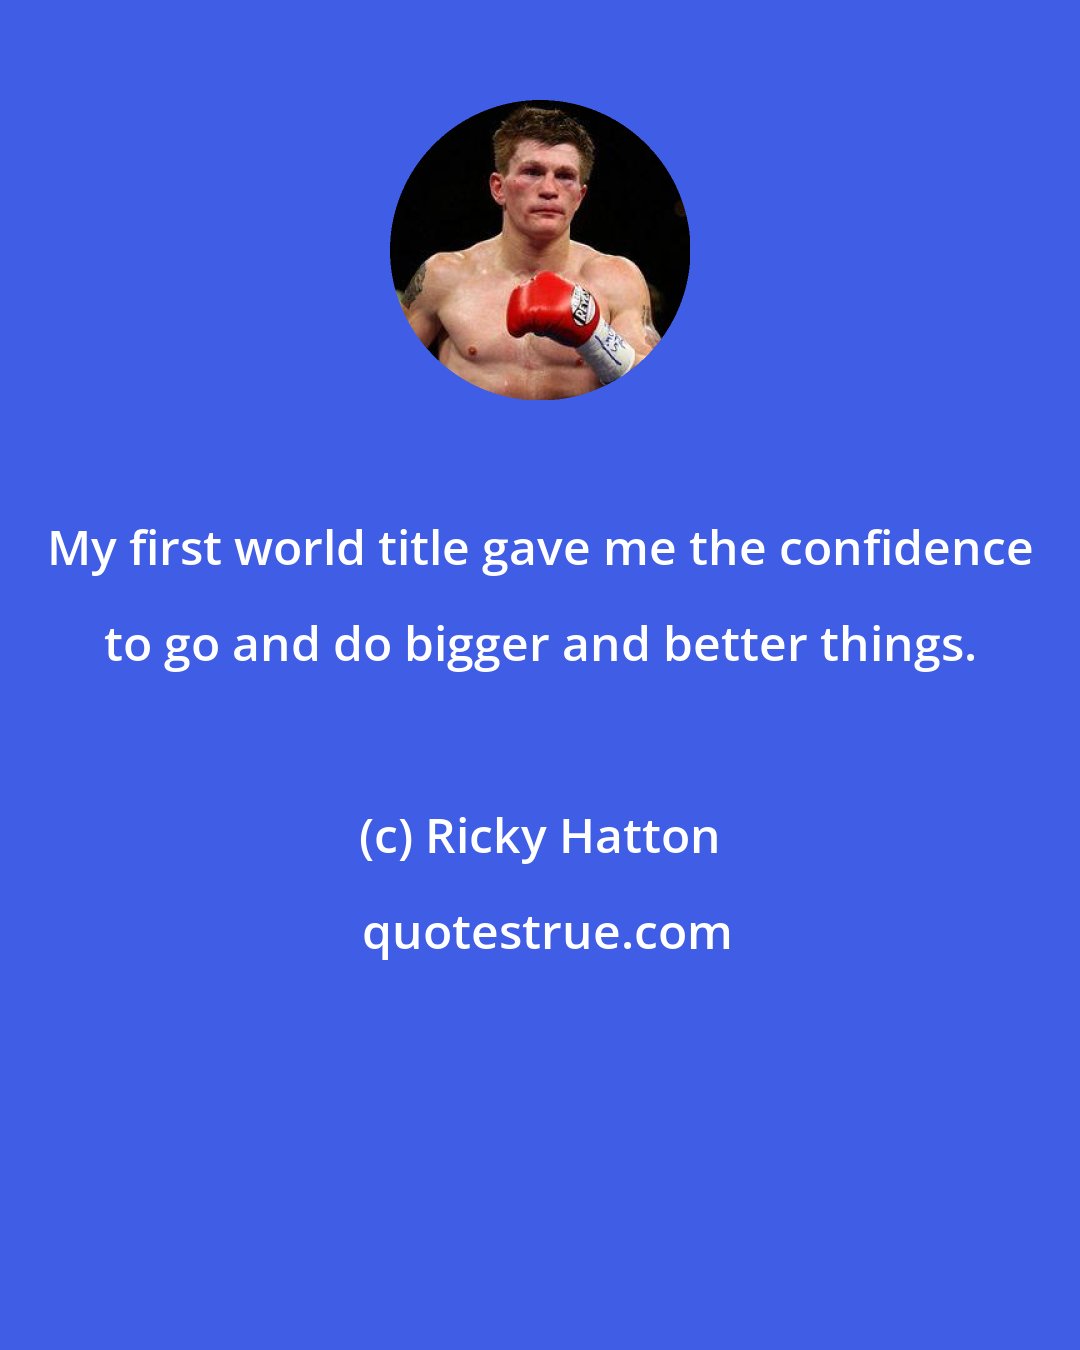 Ricky Hatton: My first world title gave me the confidence to go and do bigger and better things.